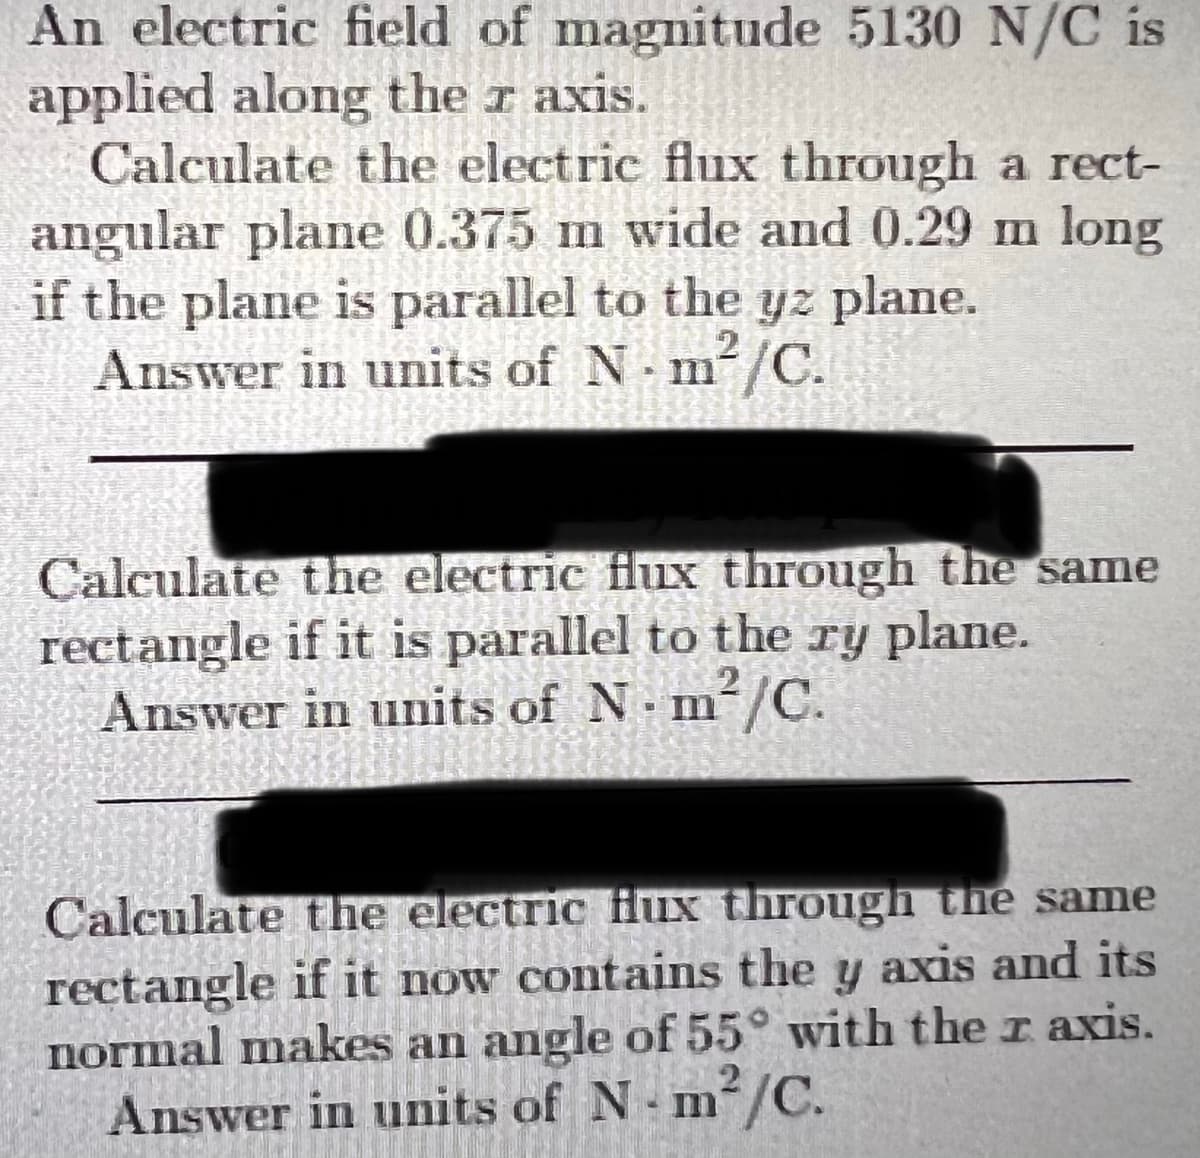 An electric field of magnitude 5130 N/C is
applied along the r axis.
Calculate the electric flux through a rect-
angular plane 0.375 m wide and 0.29 m long
if the plane is parallel to the yz plane.
Answer in units of N m/C.
Calculate the electric flux through the same
rectangle if it is parallel to the ry plane.
Answer in units of N m/C.
Calculate the electric Hux through the same
rectangle if it now contains the y axis and its
normal makes an angle of 55° with the r axis.
m²/C.
Answer in units of N m/C.
